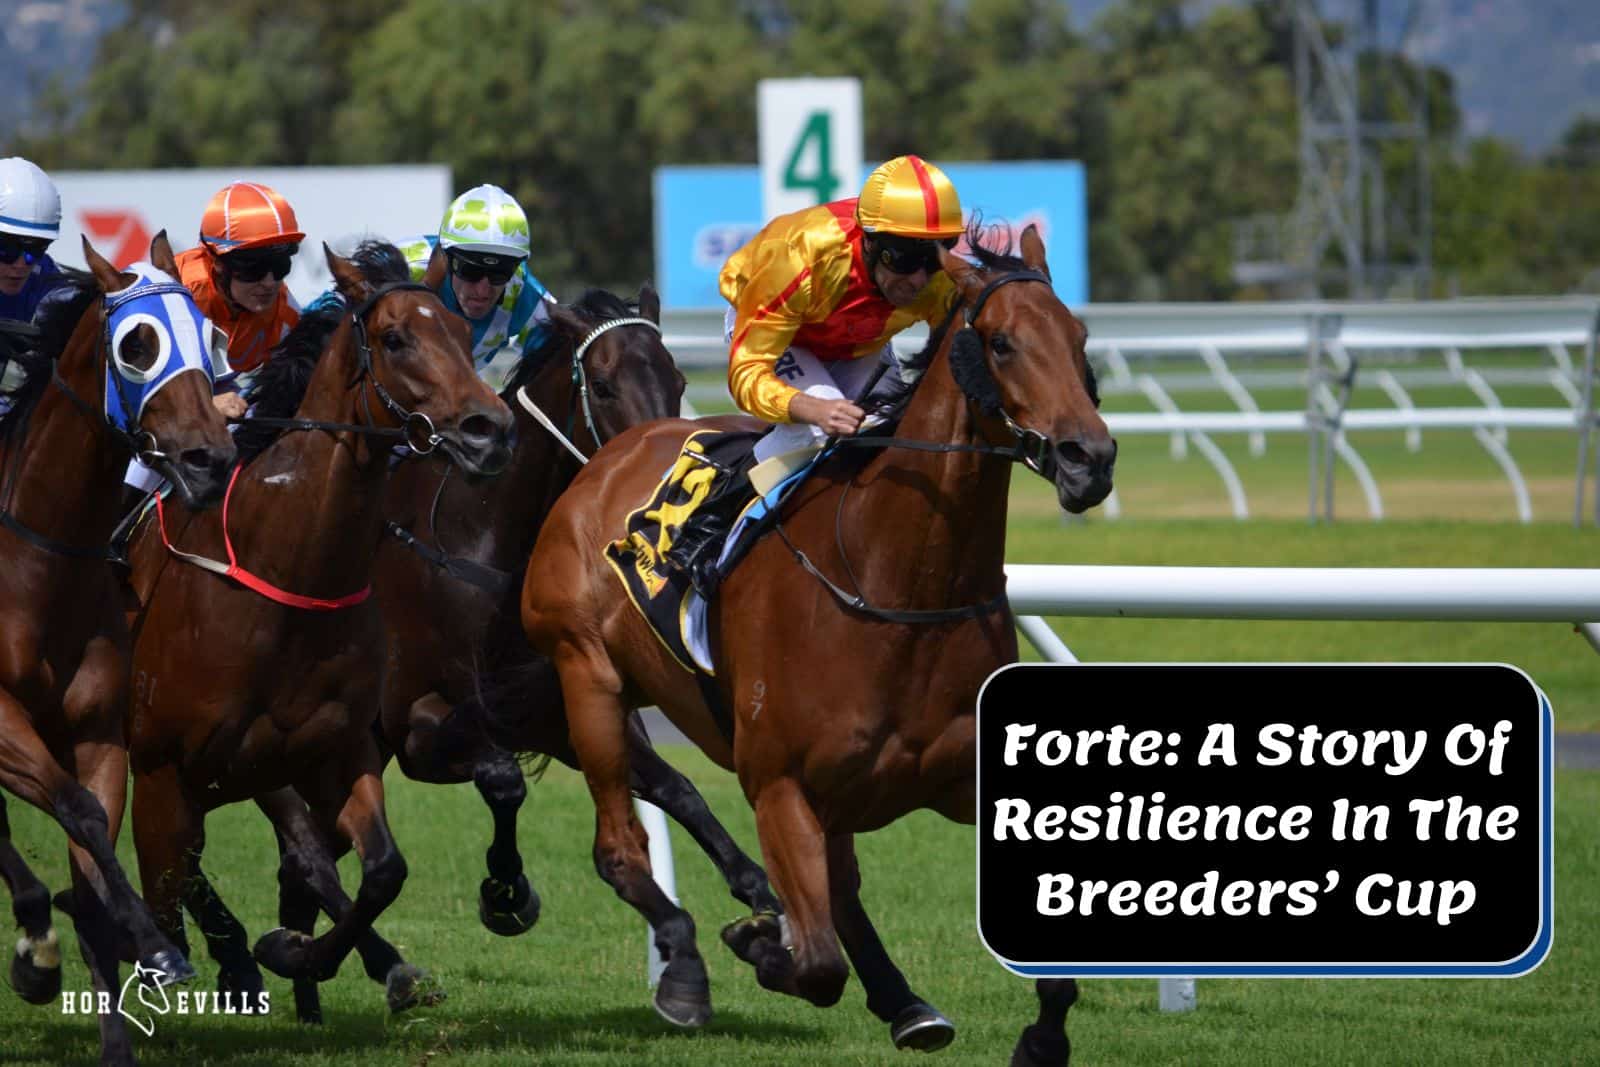 forte the horse racing on the breeder's cup